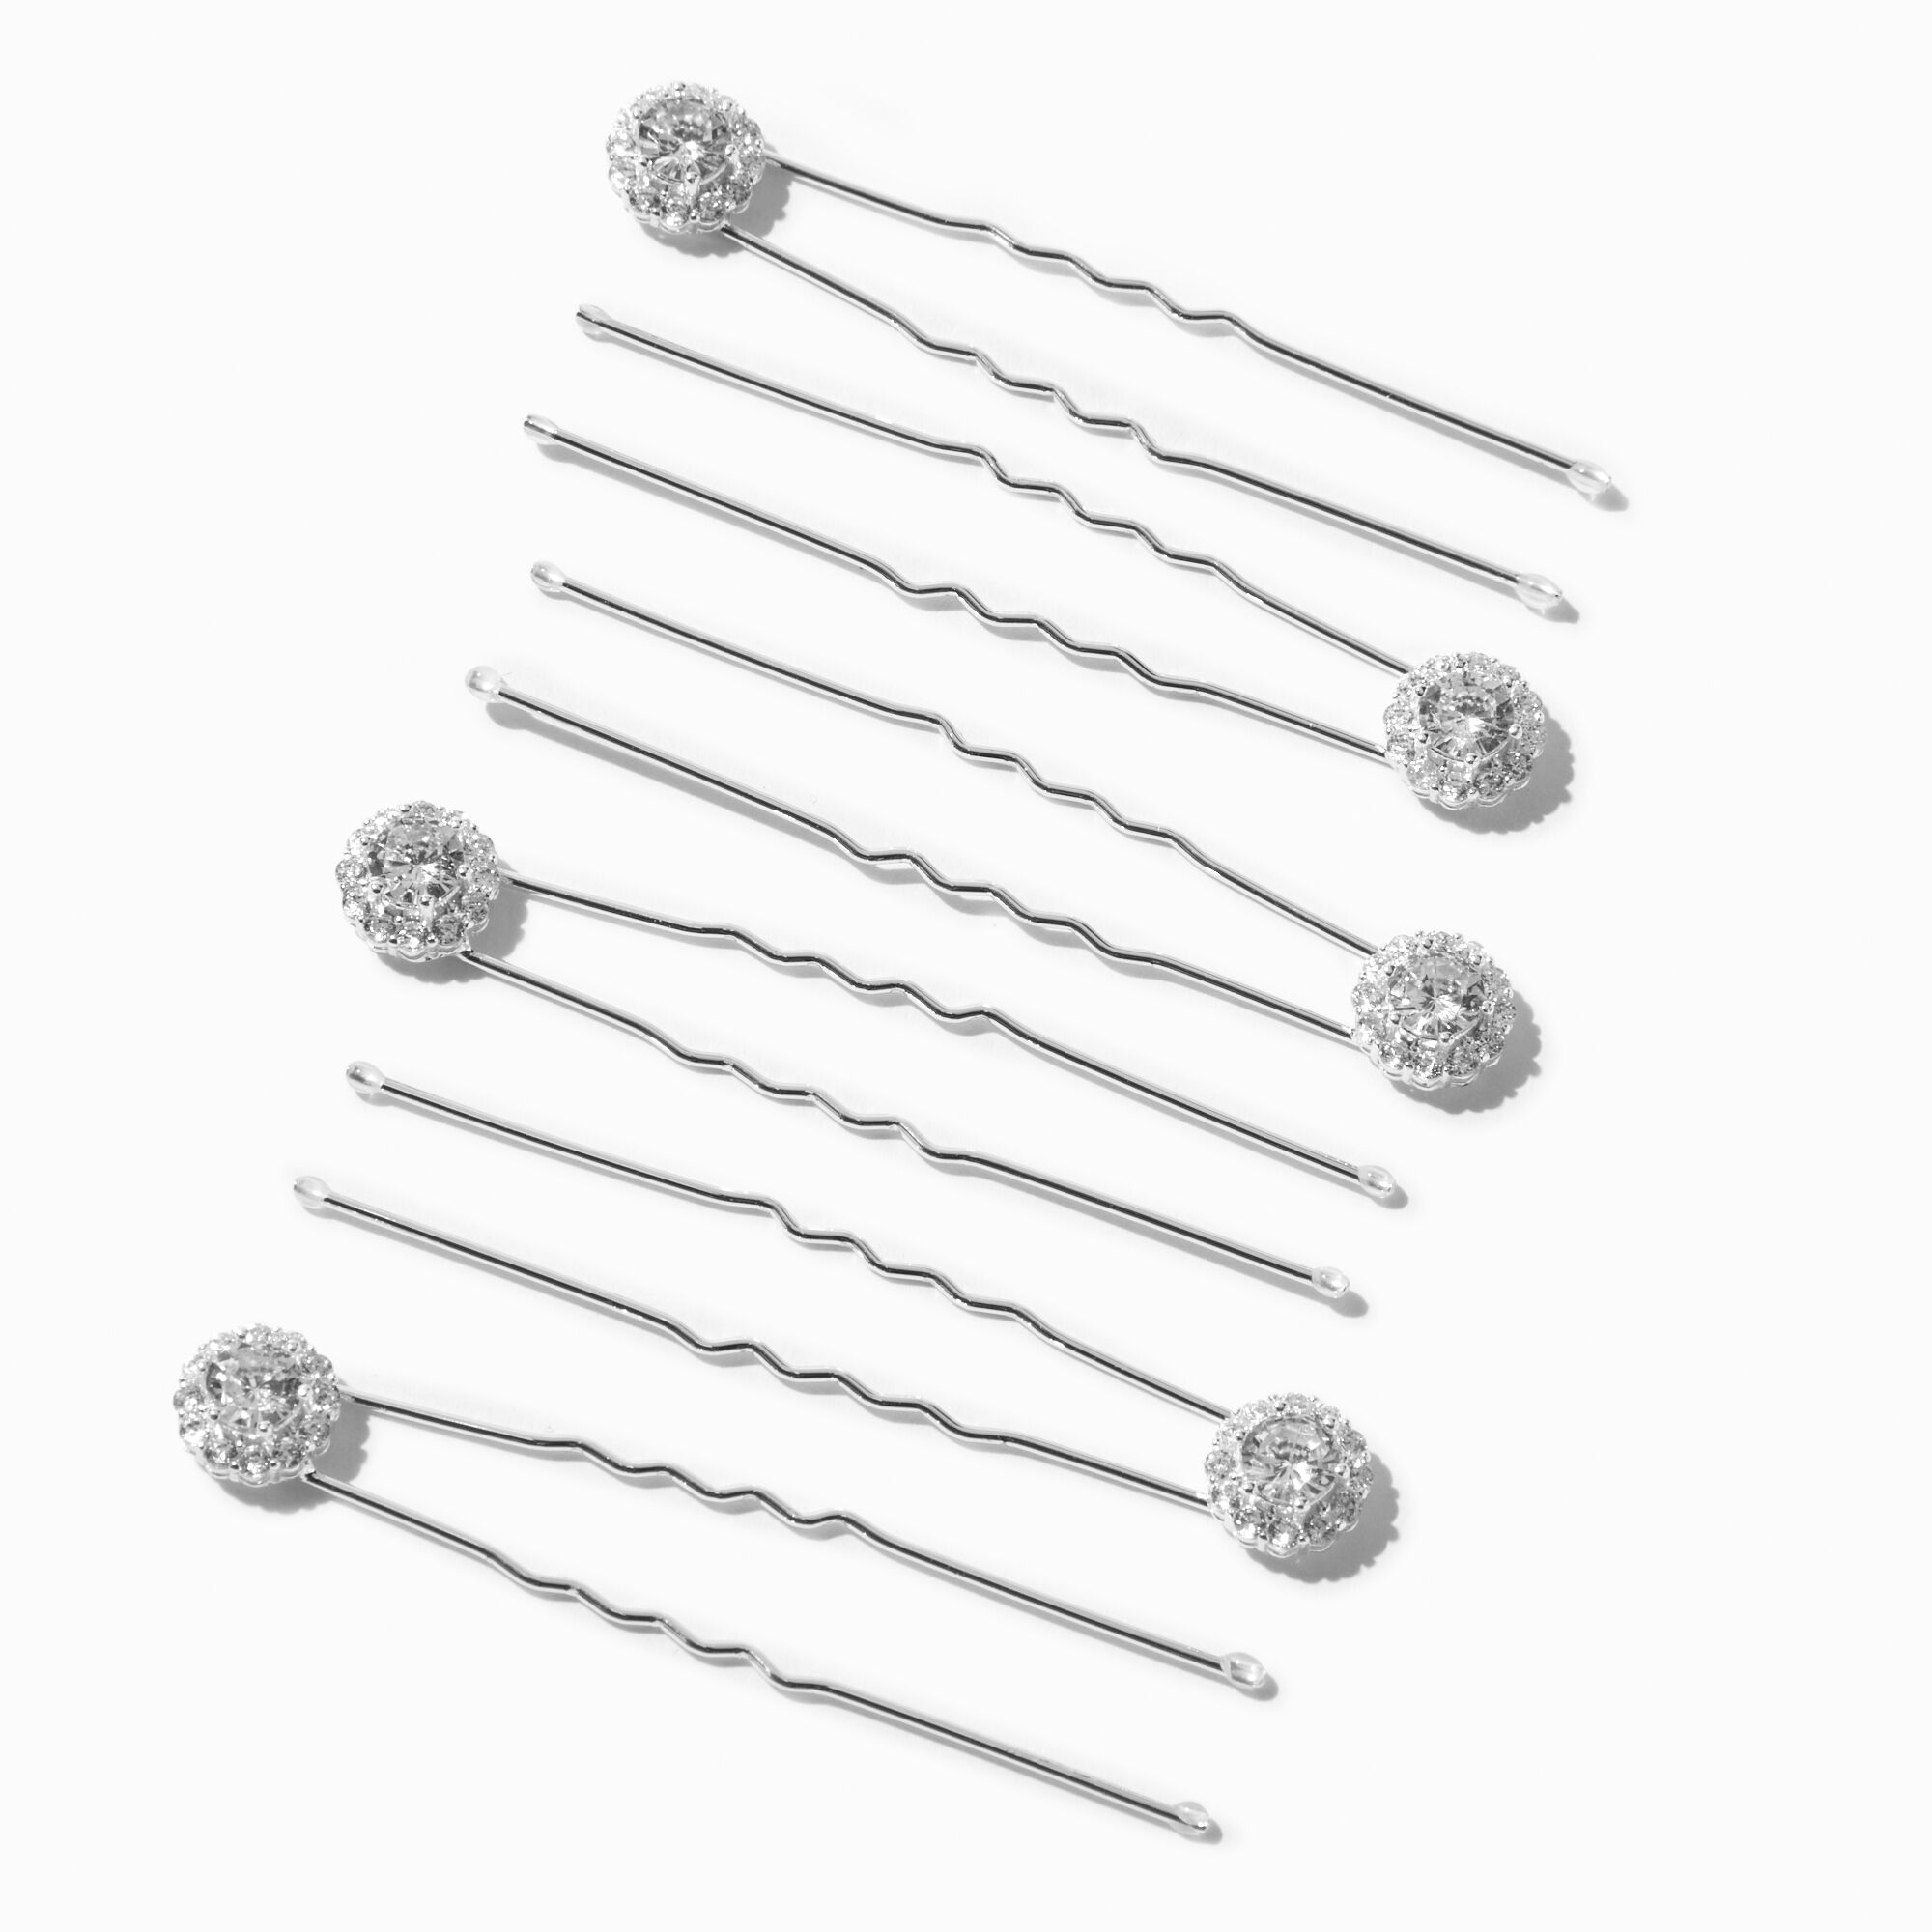 View Claires Tone Halo Hair Pins 6 Pack Silver information